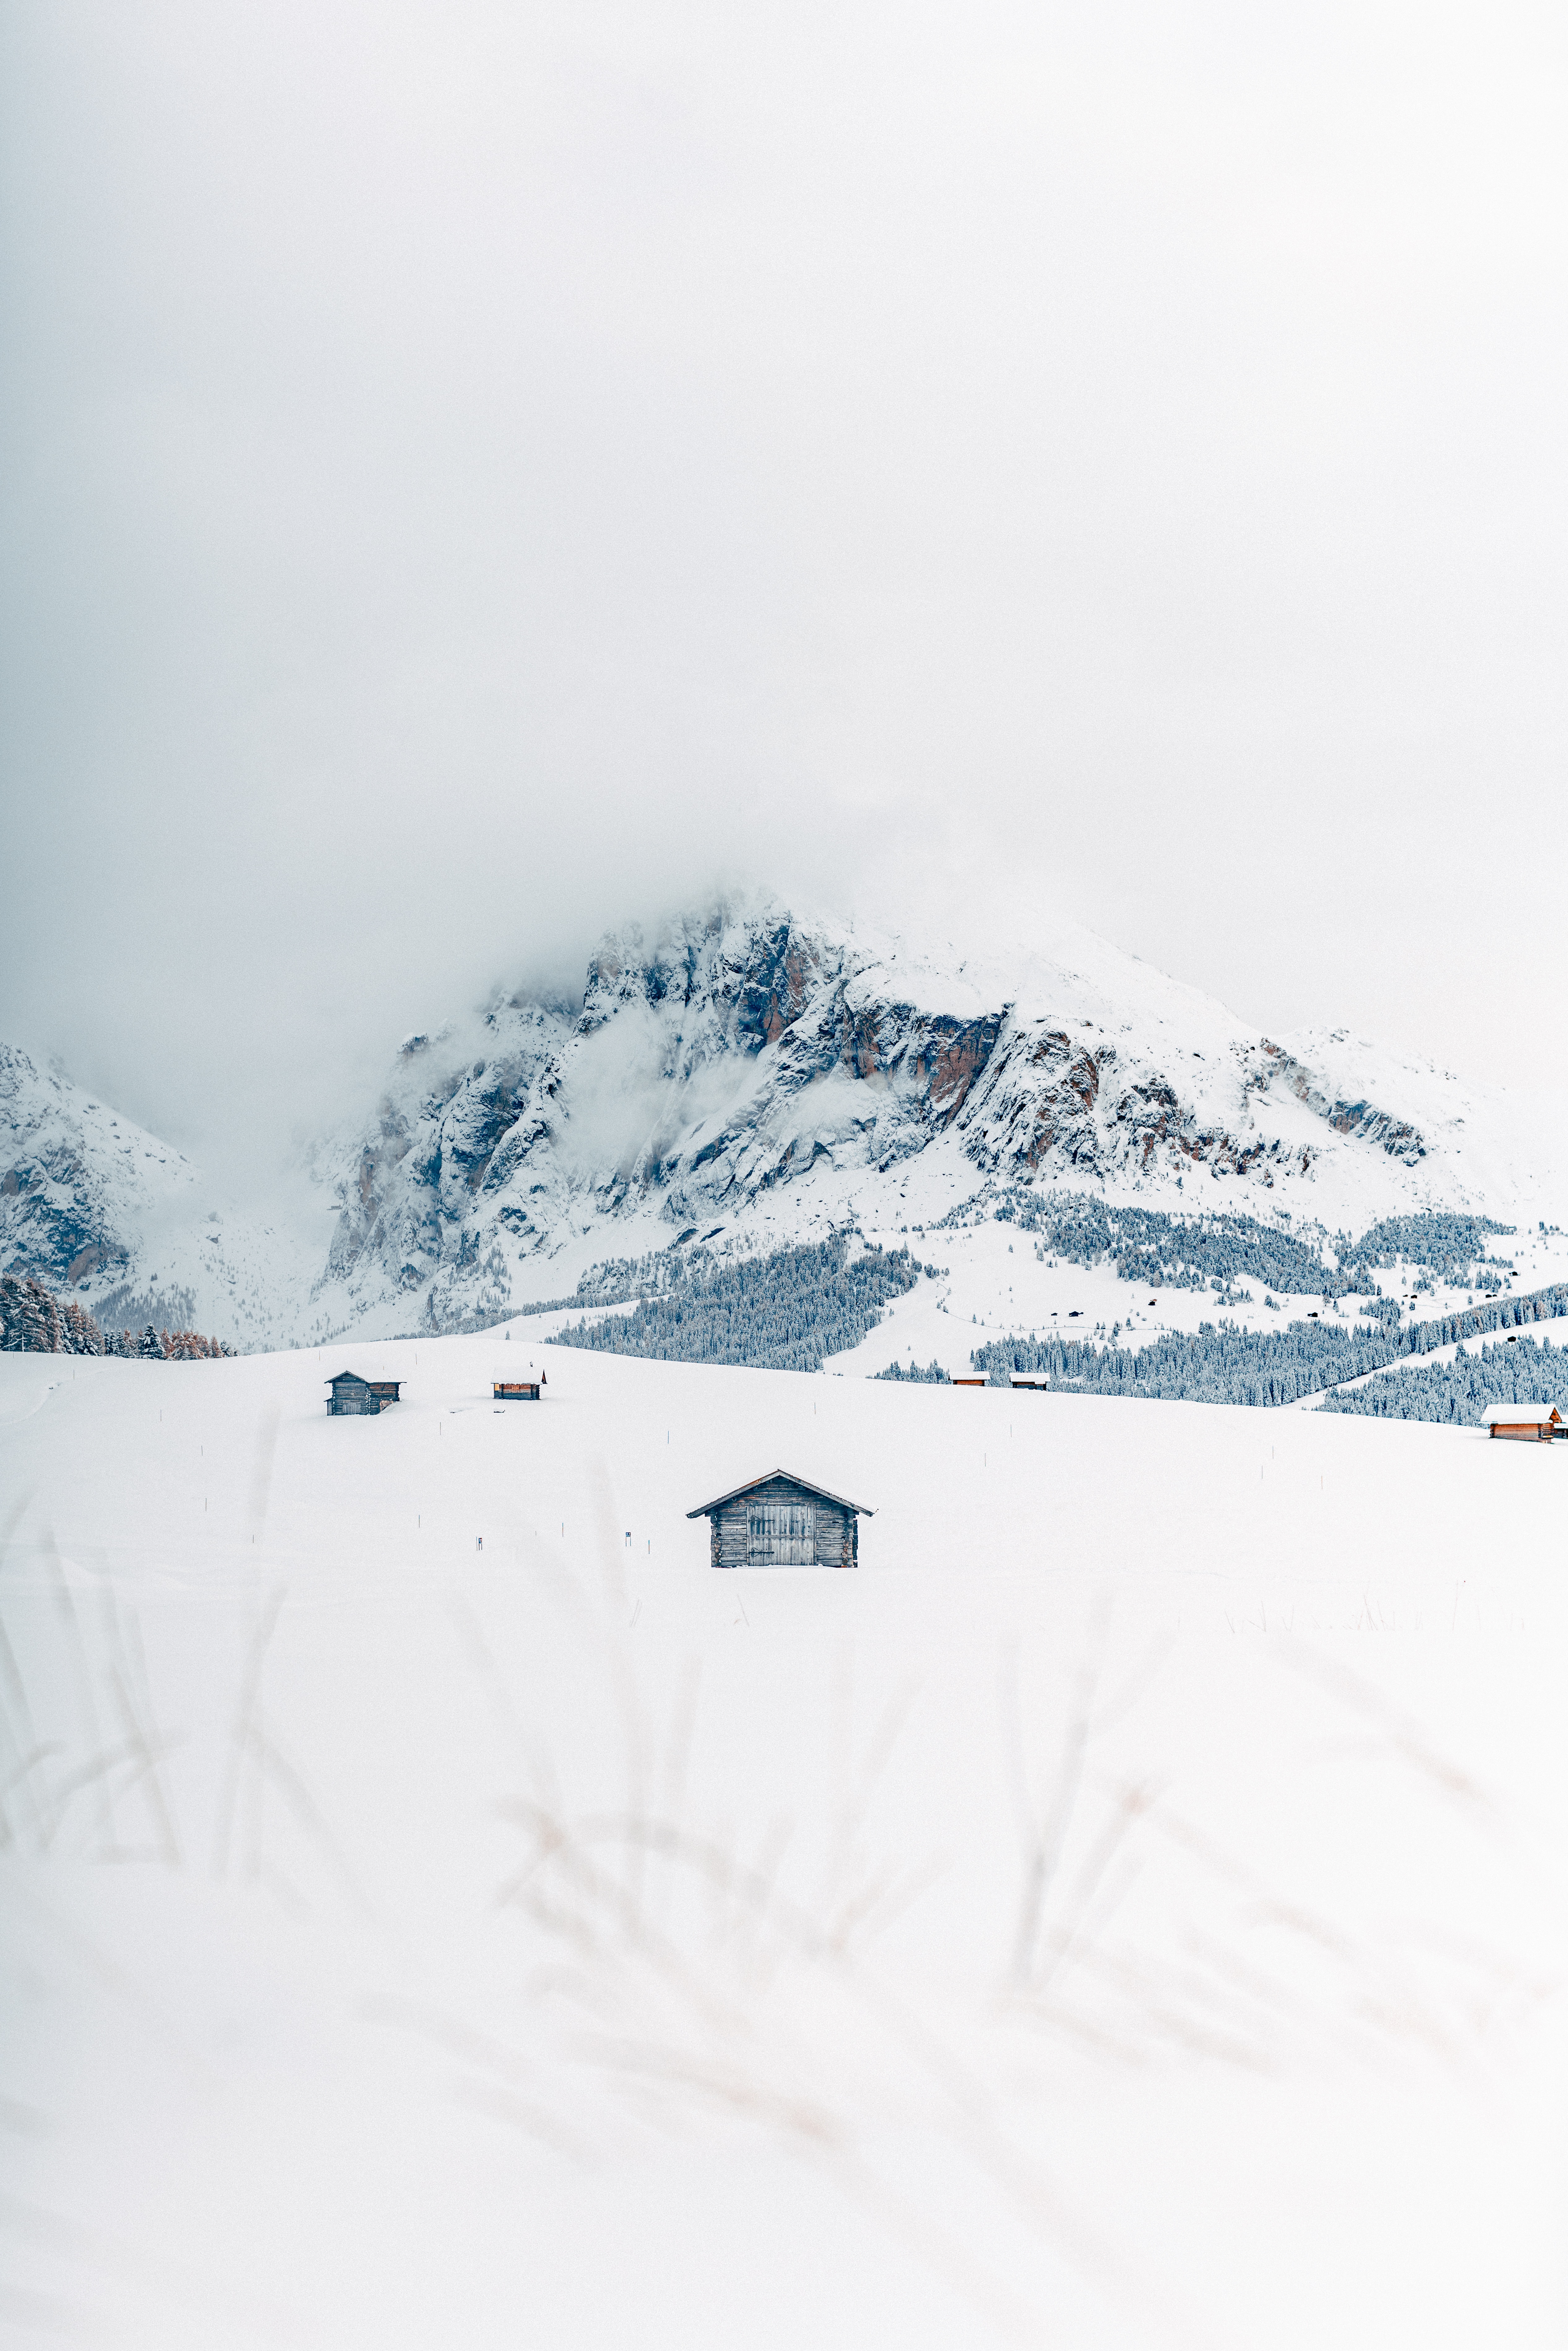 landscape, winter, nature, houses, mountains, snow, small houses